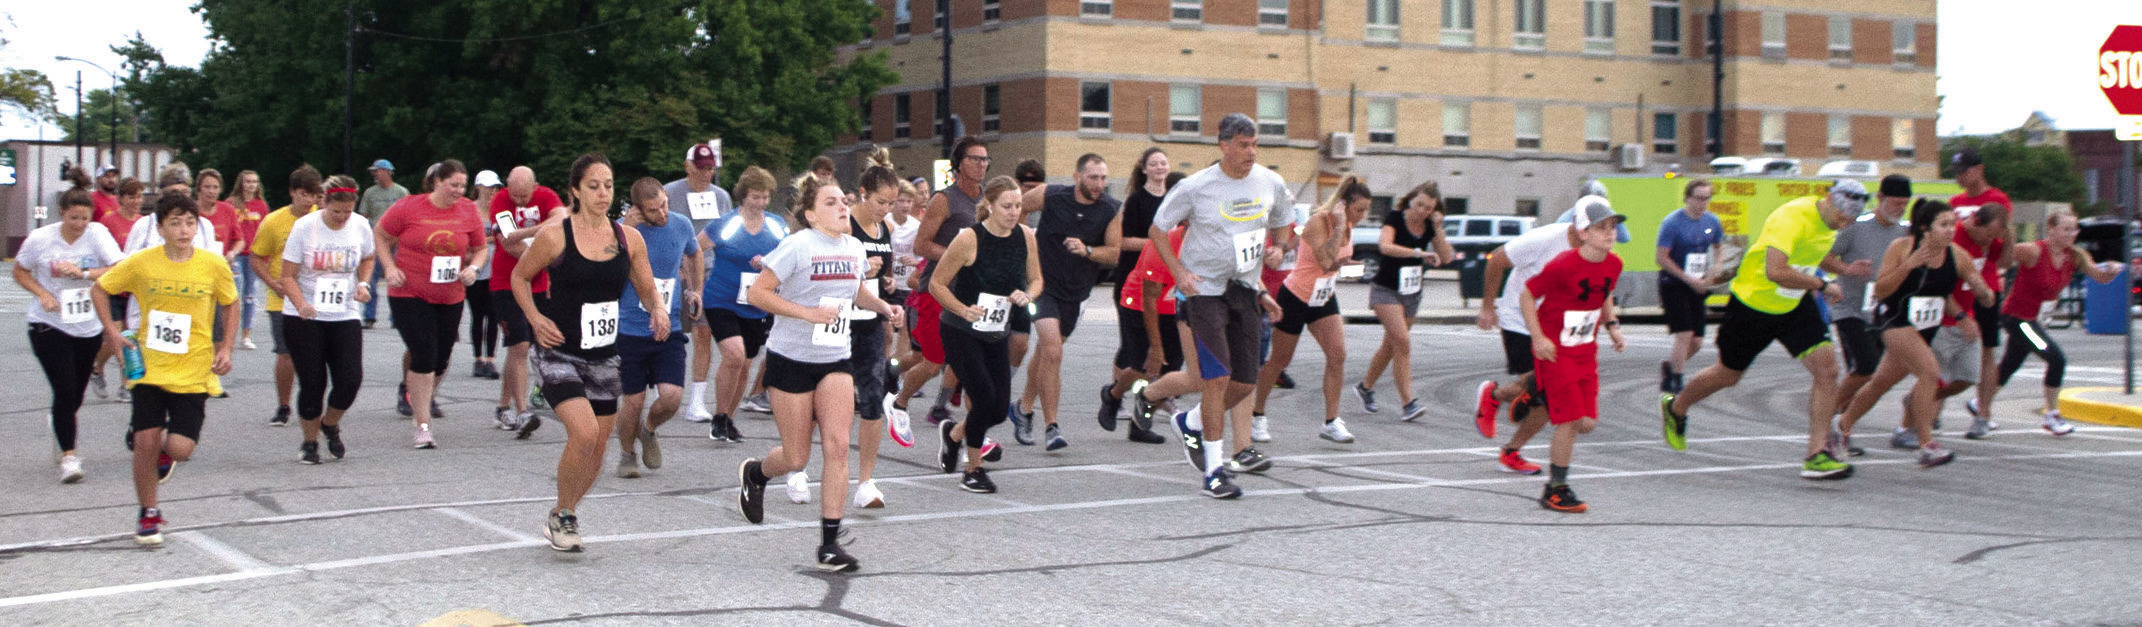 Register early for annual Columbus Day 5K race Columbus News Report